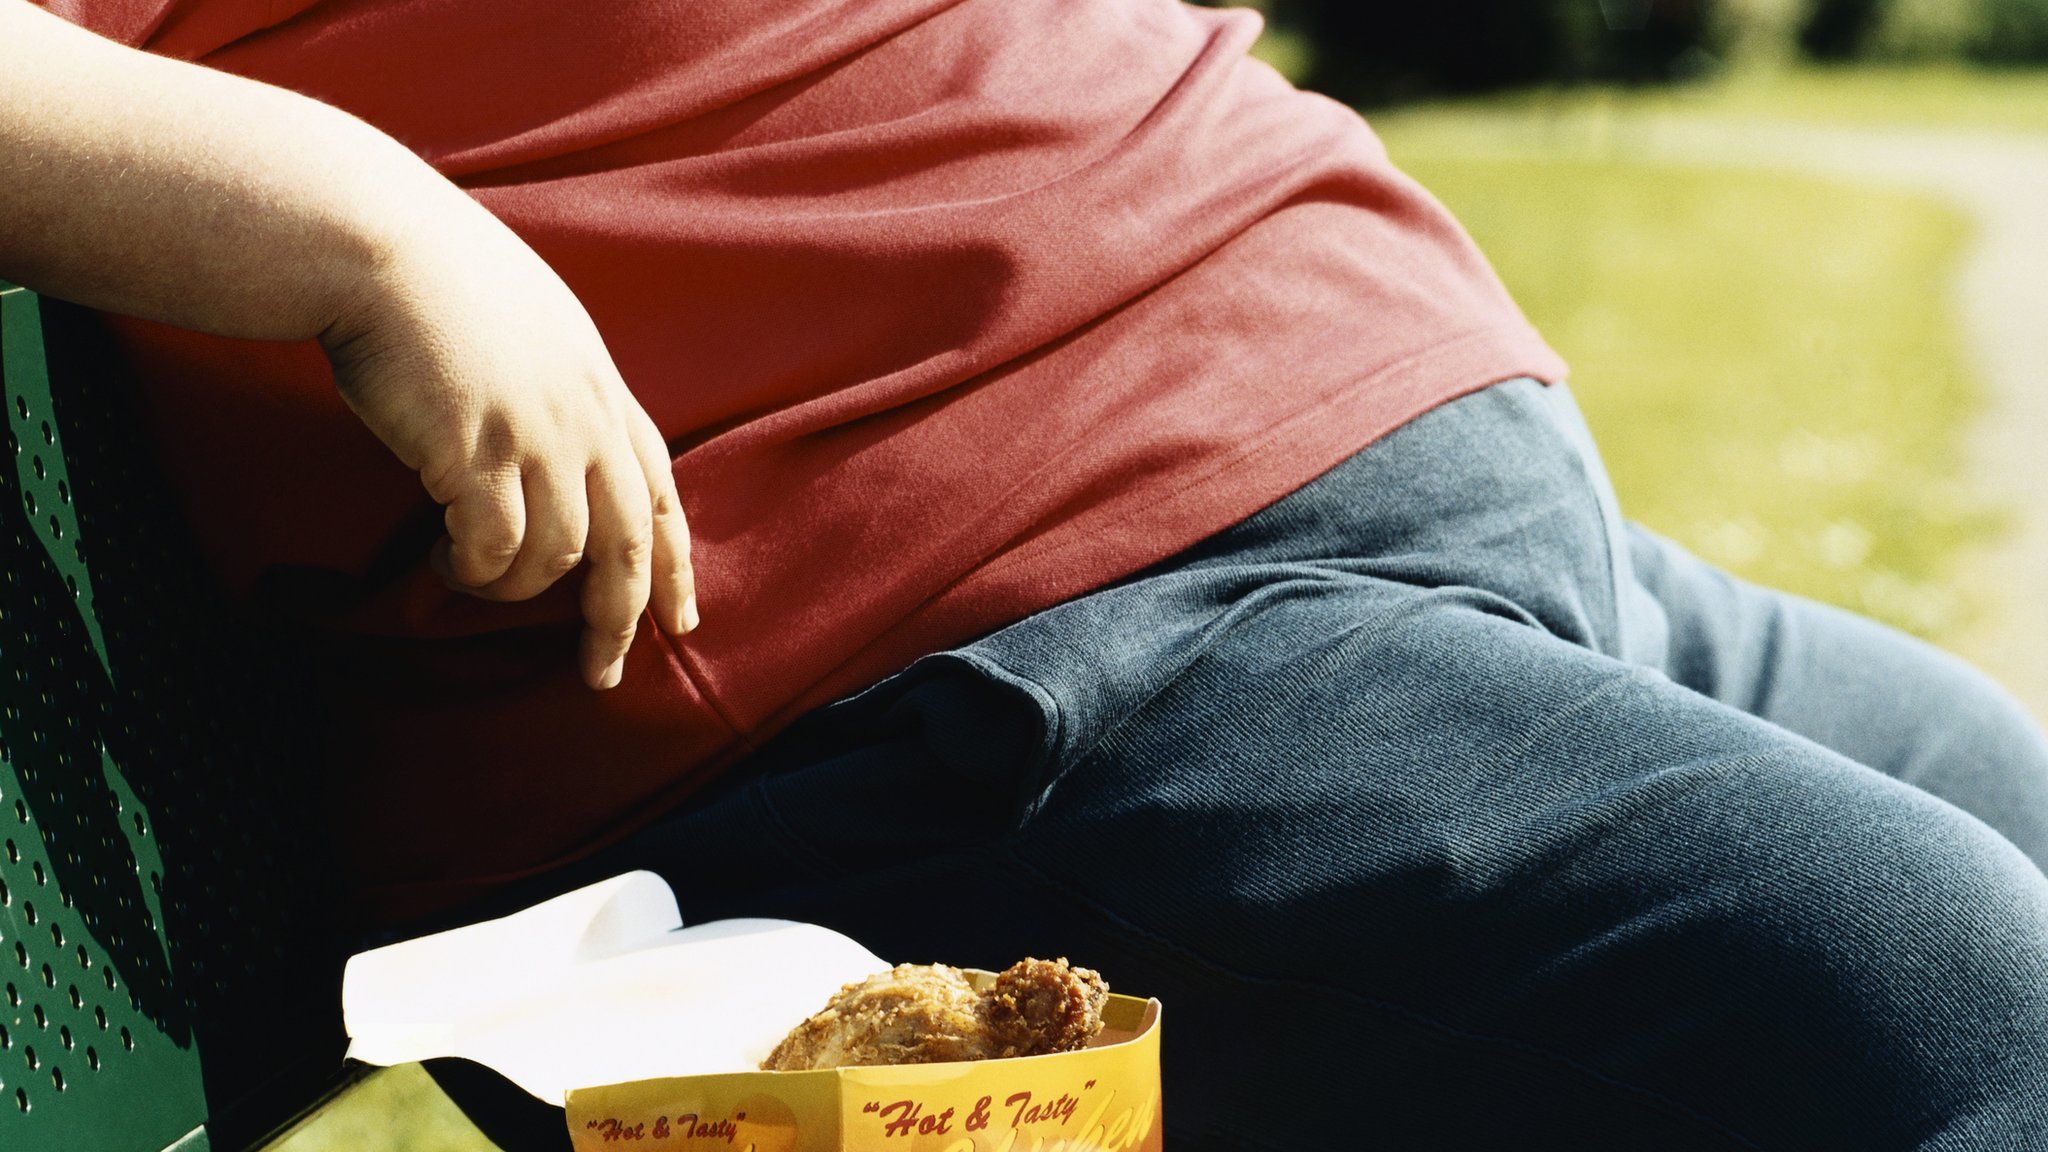 More than a quarter of men and women in the UK are now obese